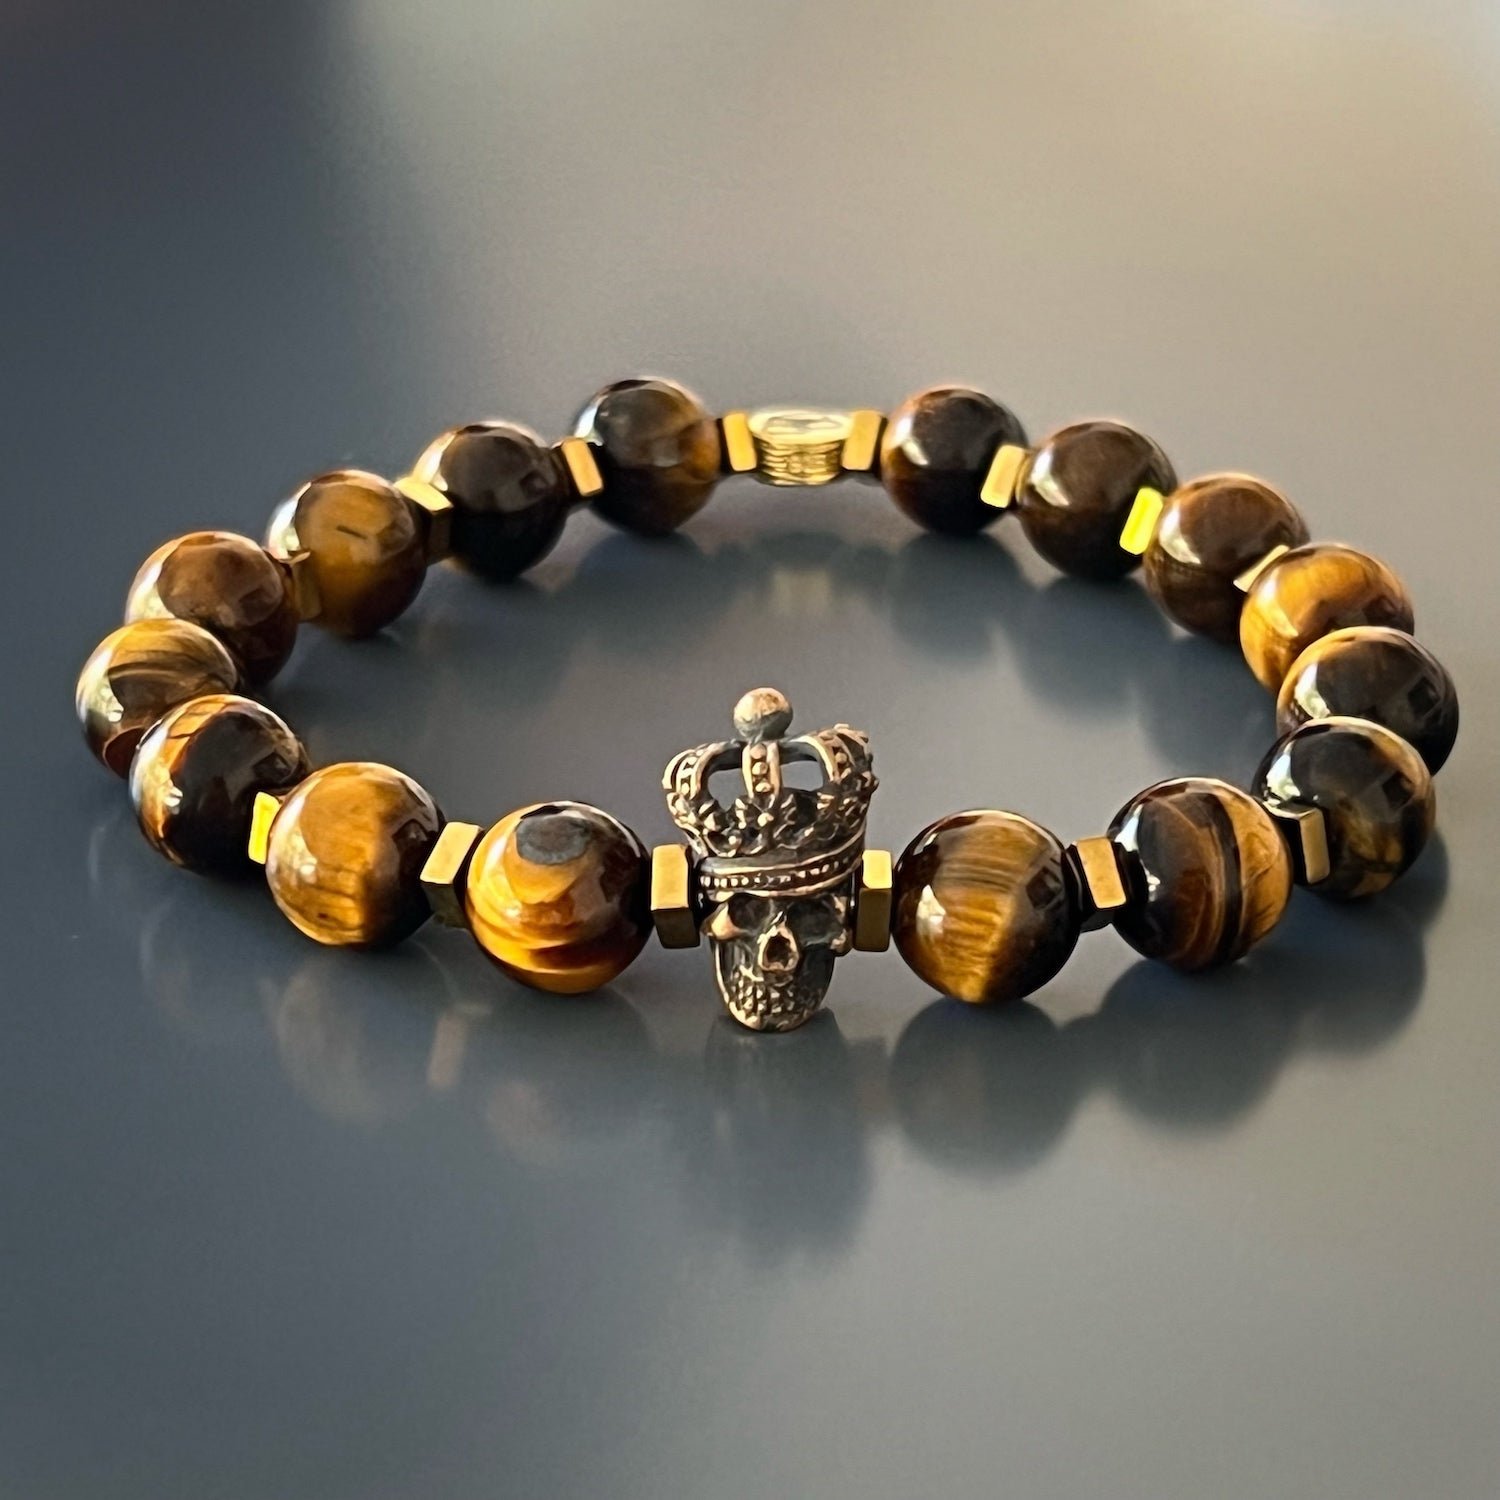 Grounding and Protective - Tiger's Eye Stone Benefits.